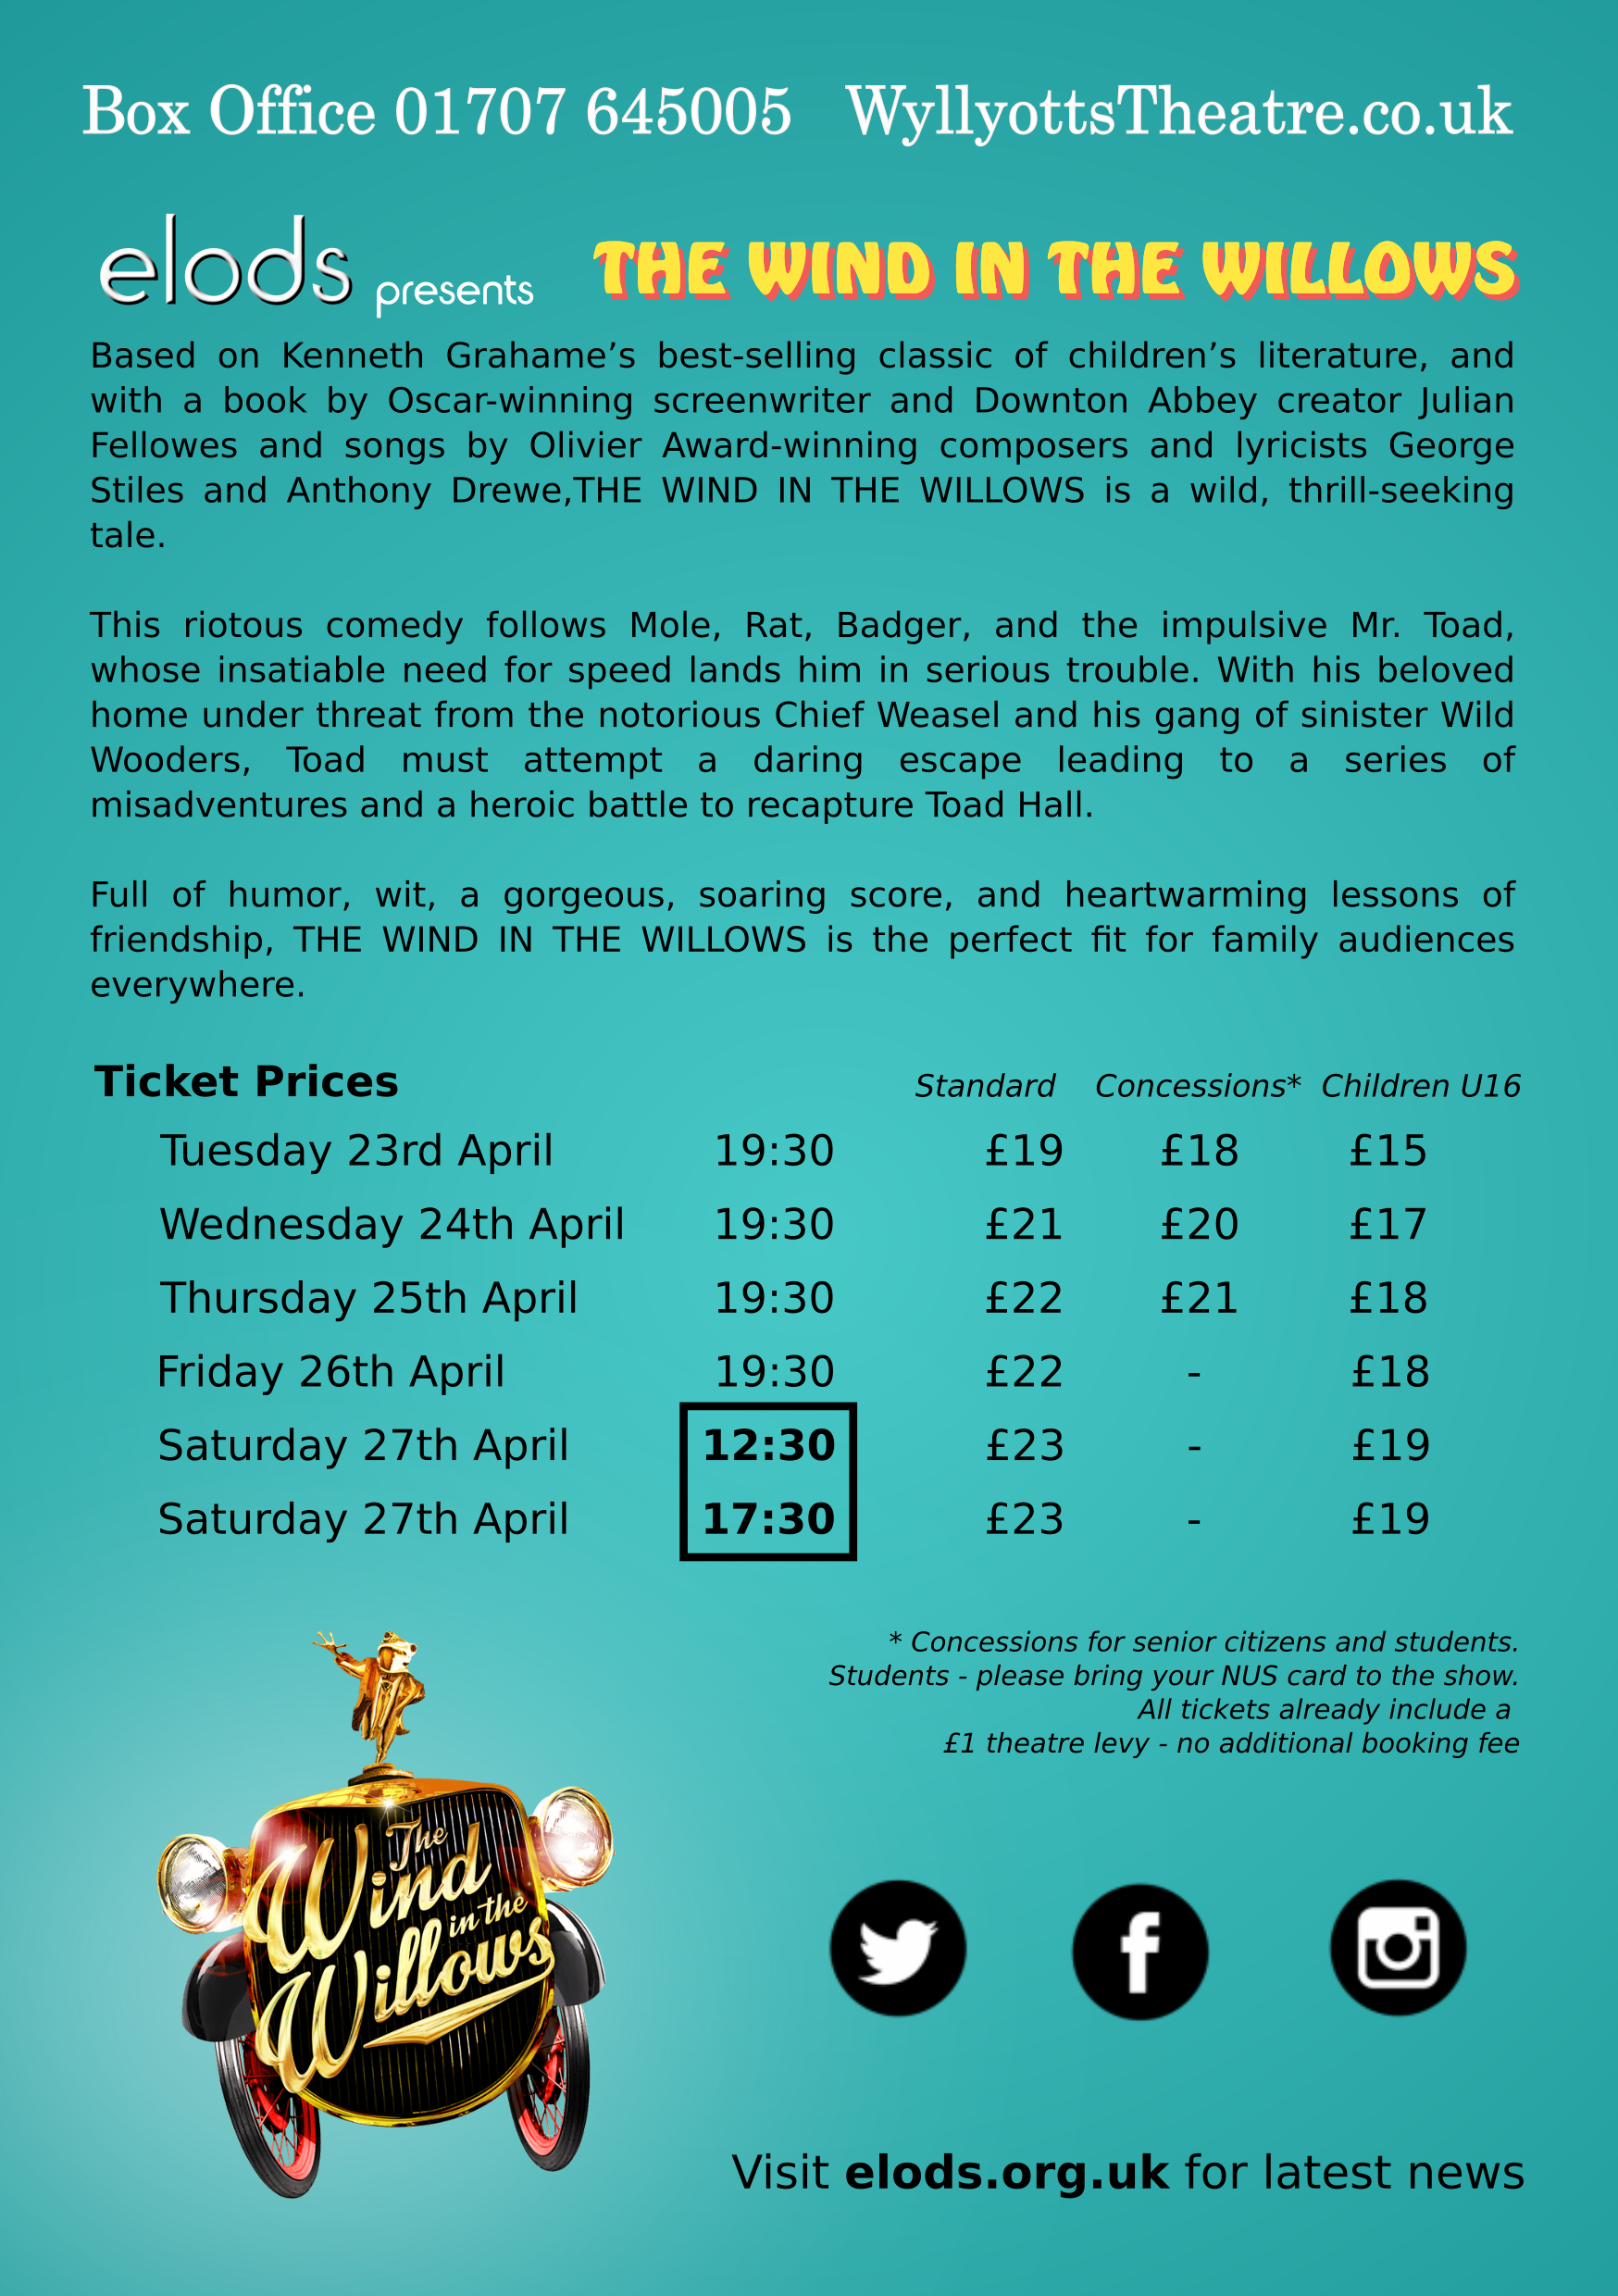 The Wind In The Willows- info and prices